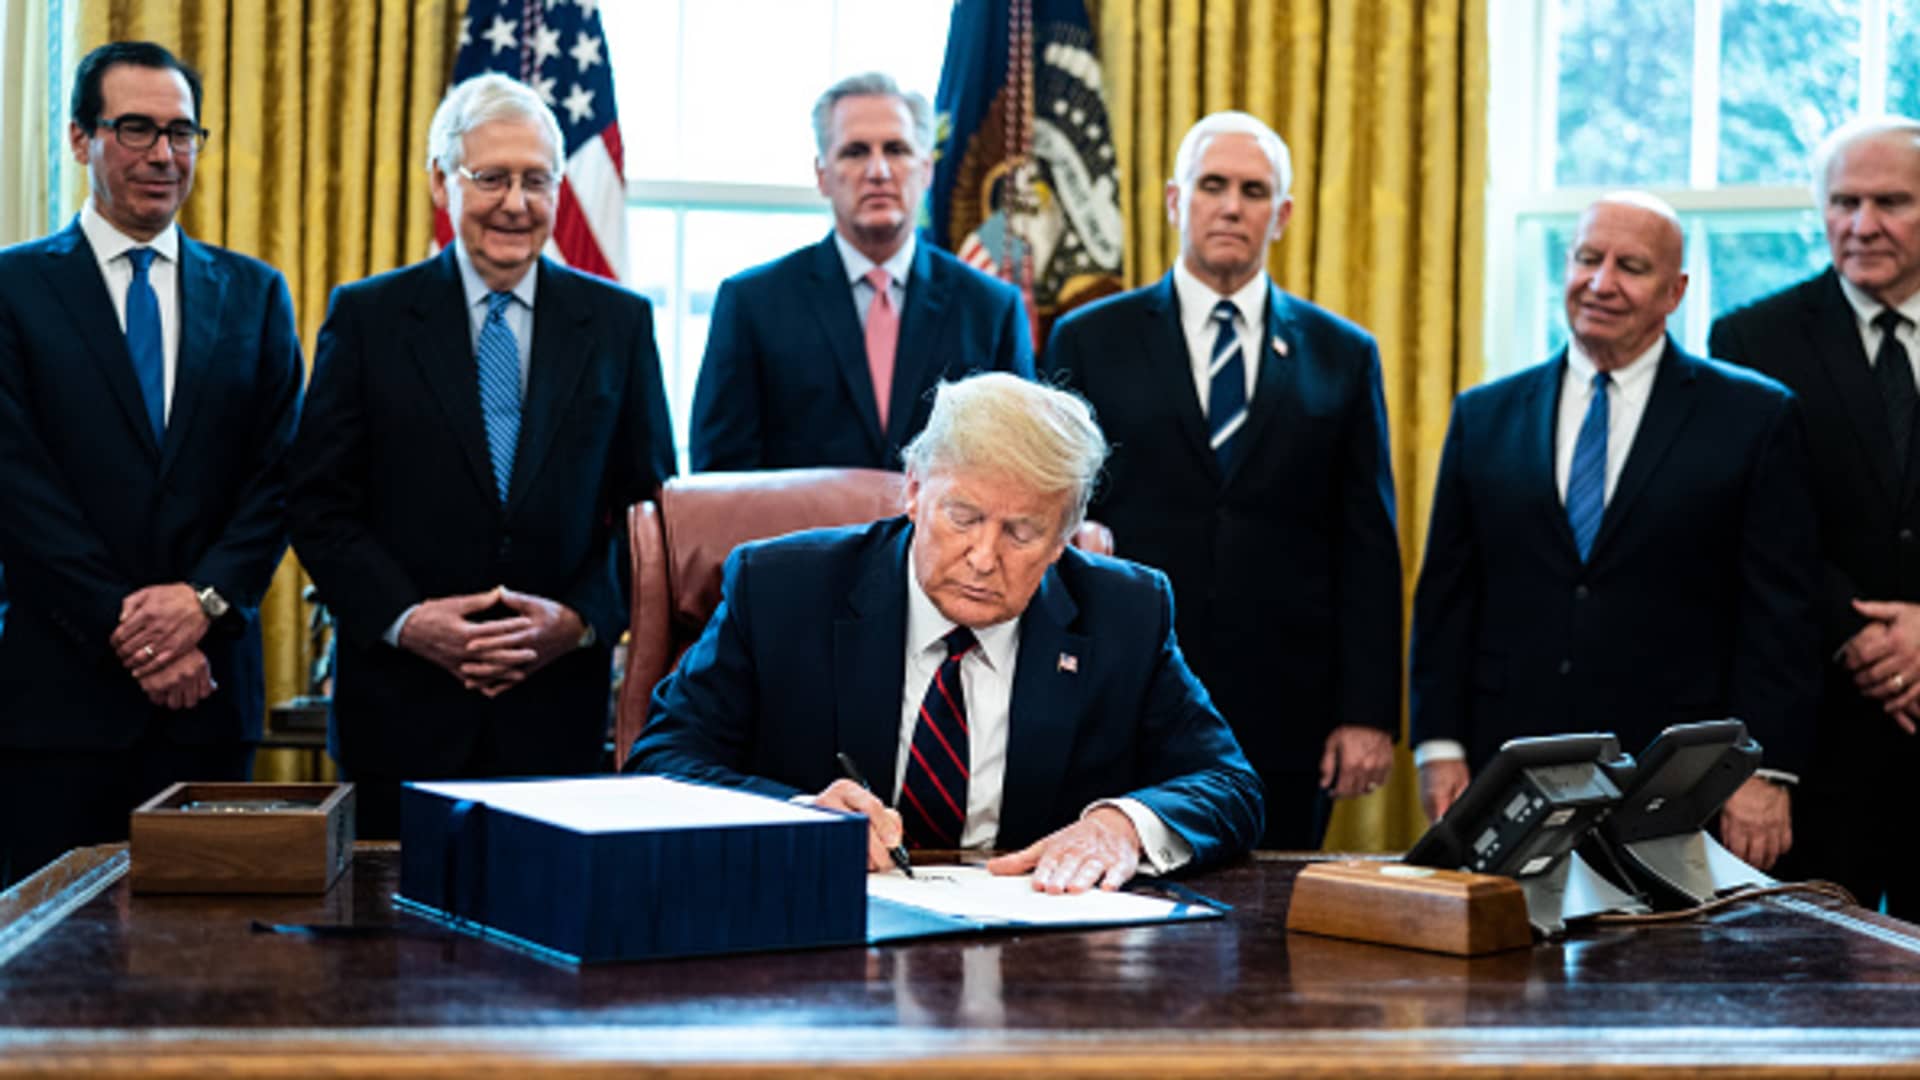 U.S. President Donald Trump signs H.R. 748, the CARES Act in the Oval Office of the White House on March 27, 2020 in Washington, DC.